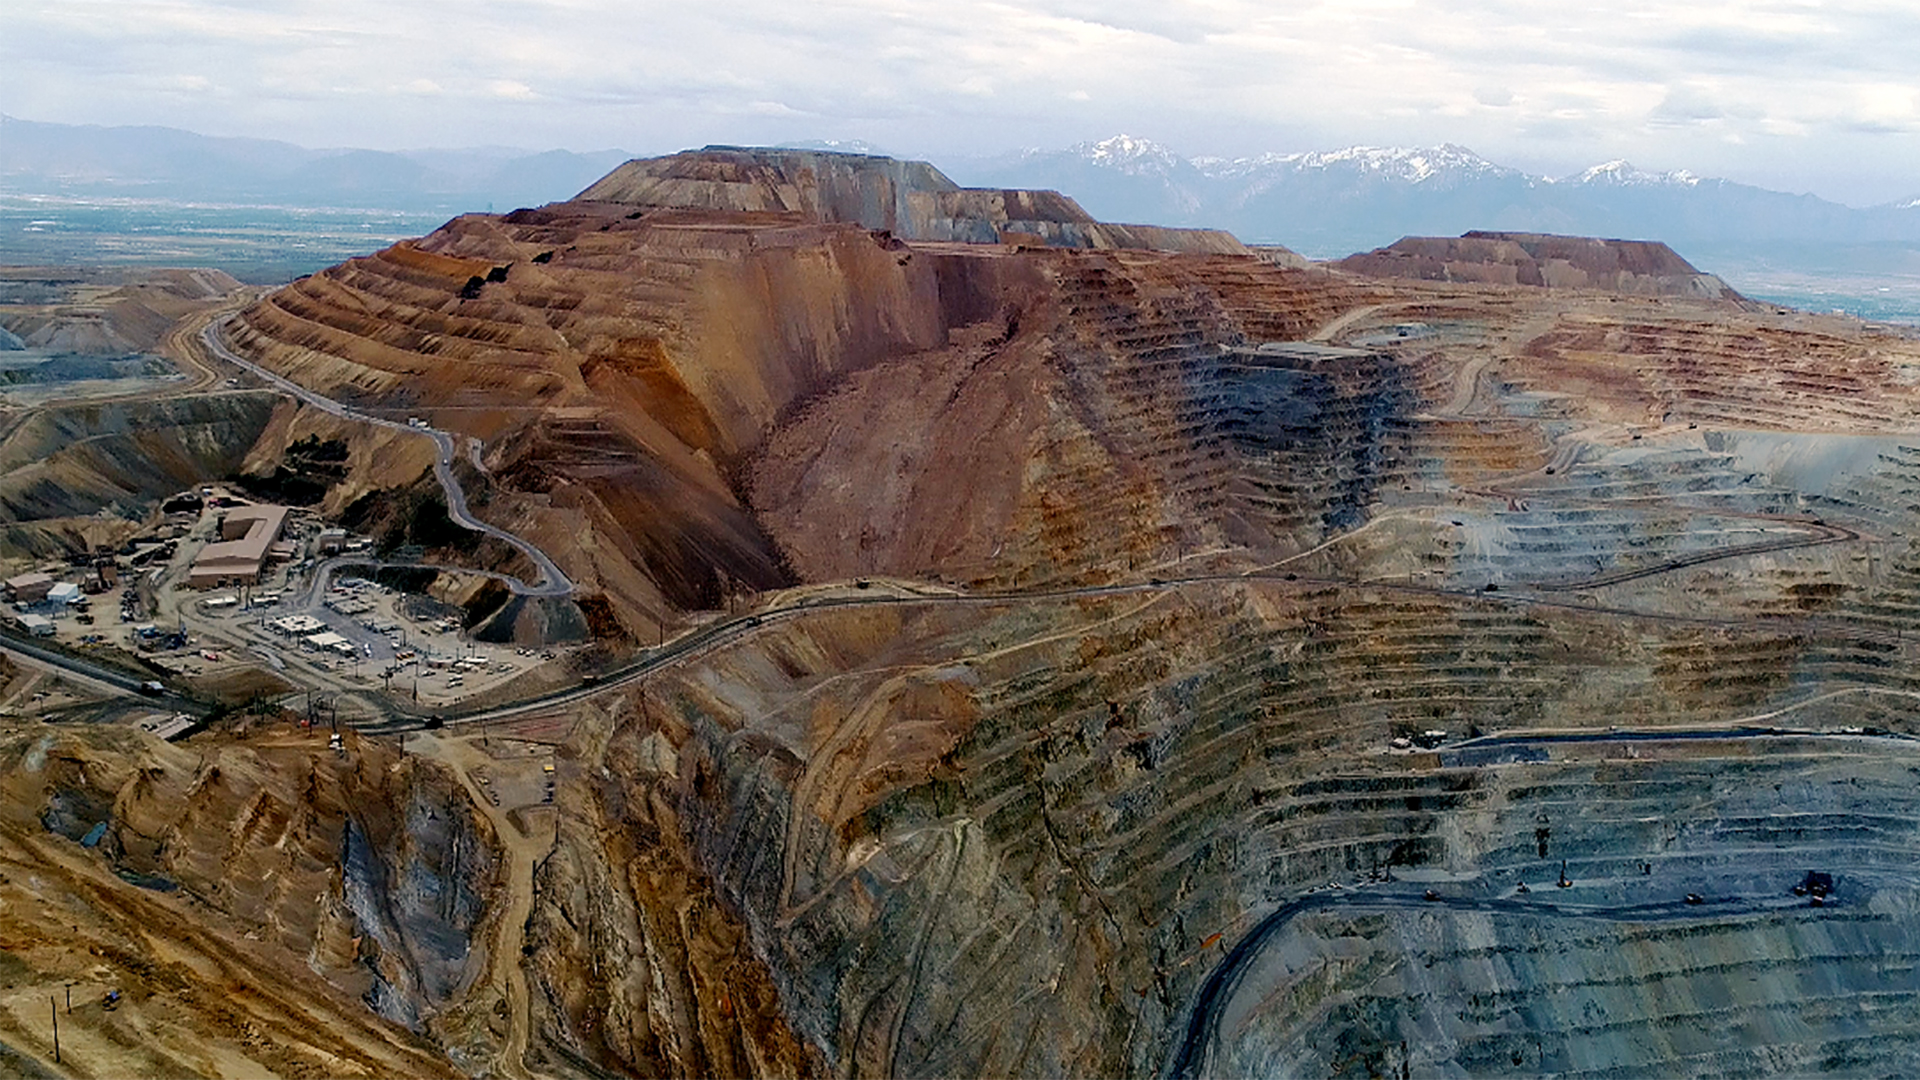 Kennecott from the air